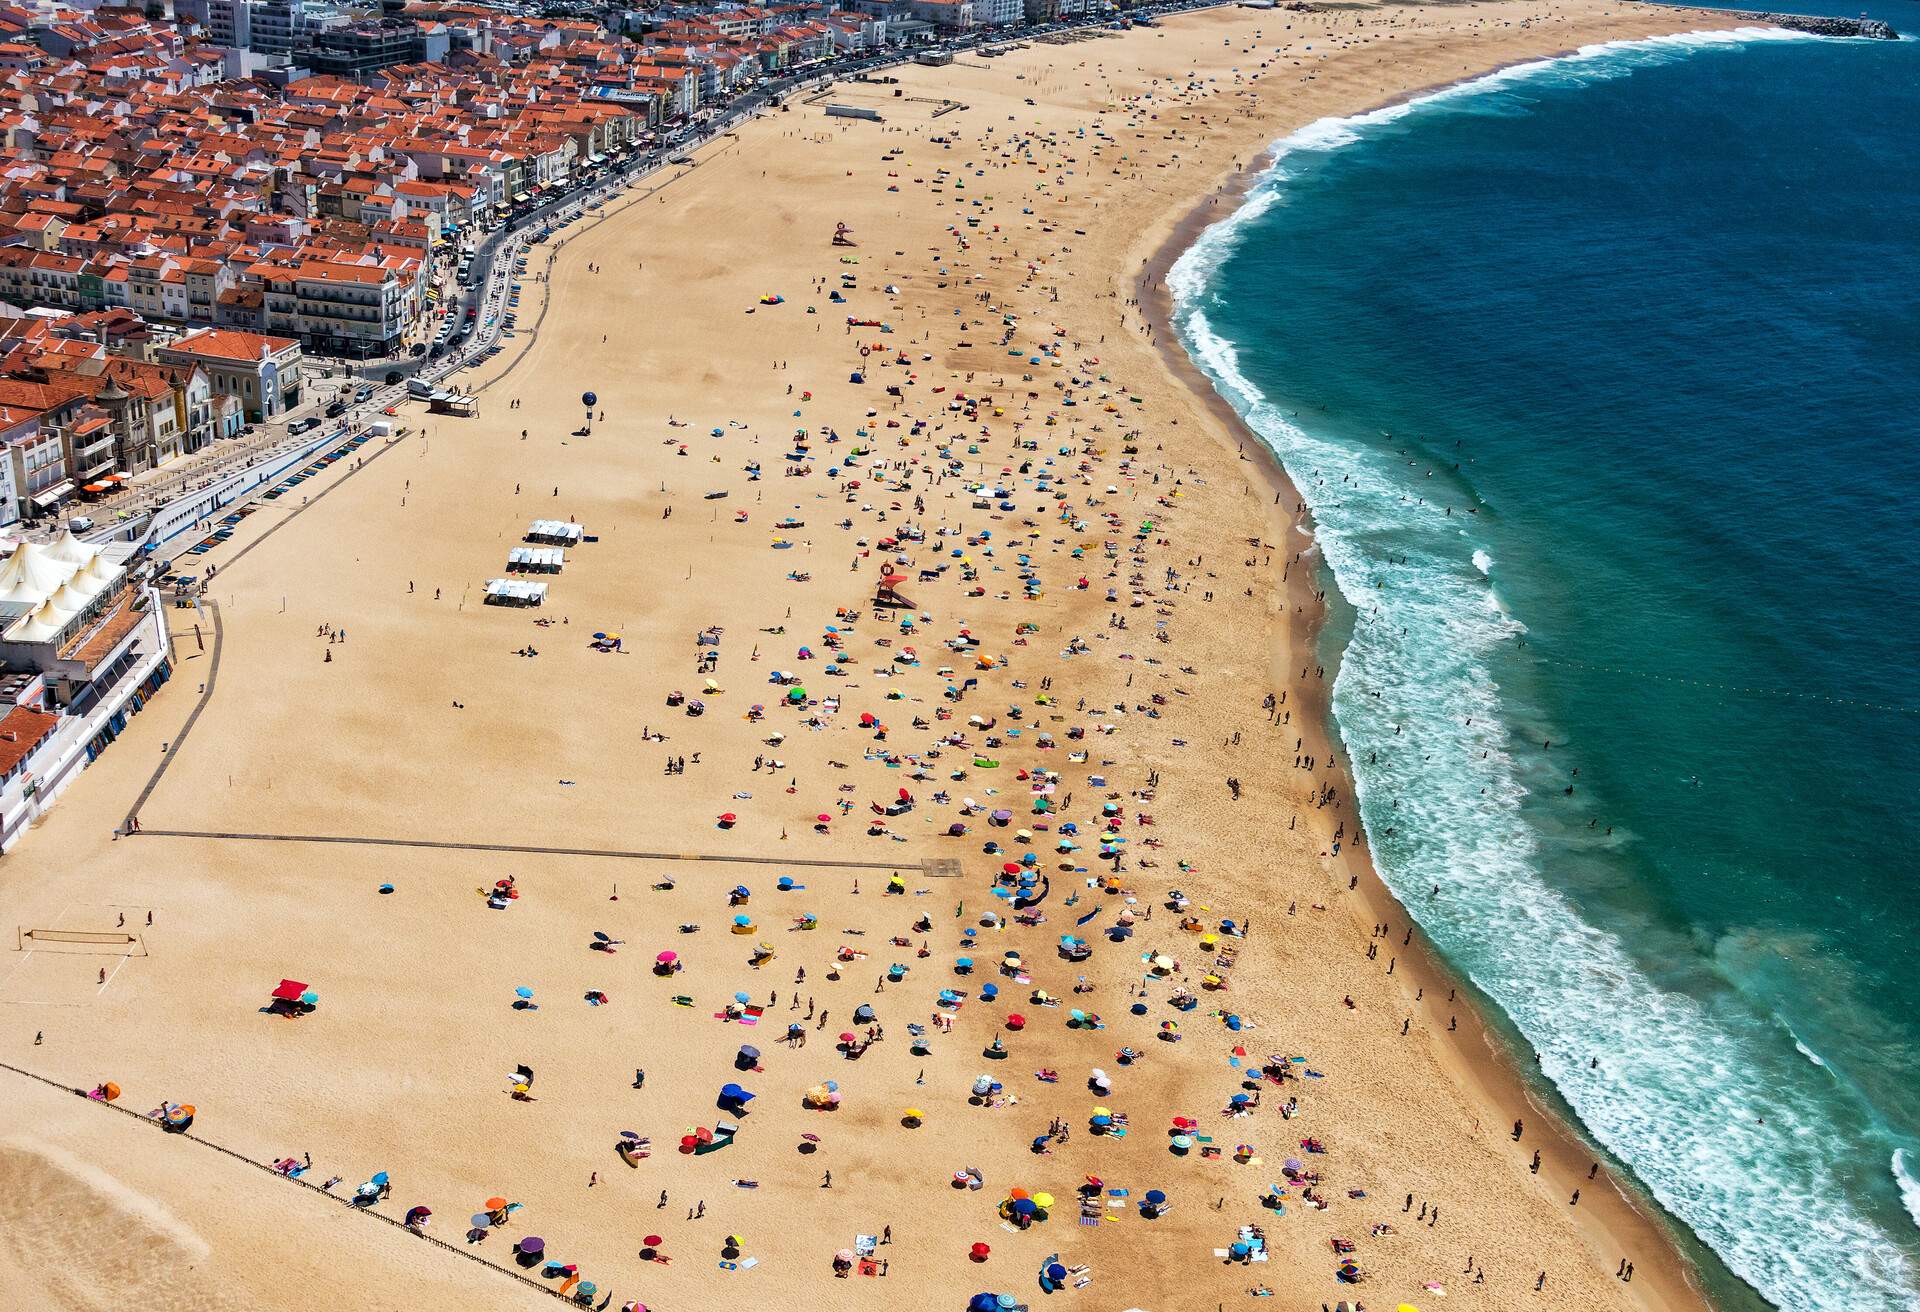 DEST_PORTUGAL_NAZARE_BEACH_AERIAL_GettyImages-547410618